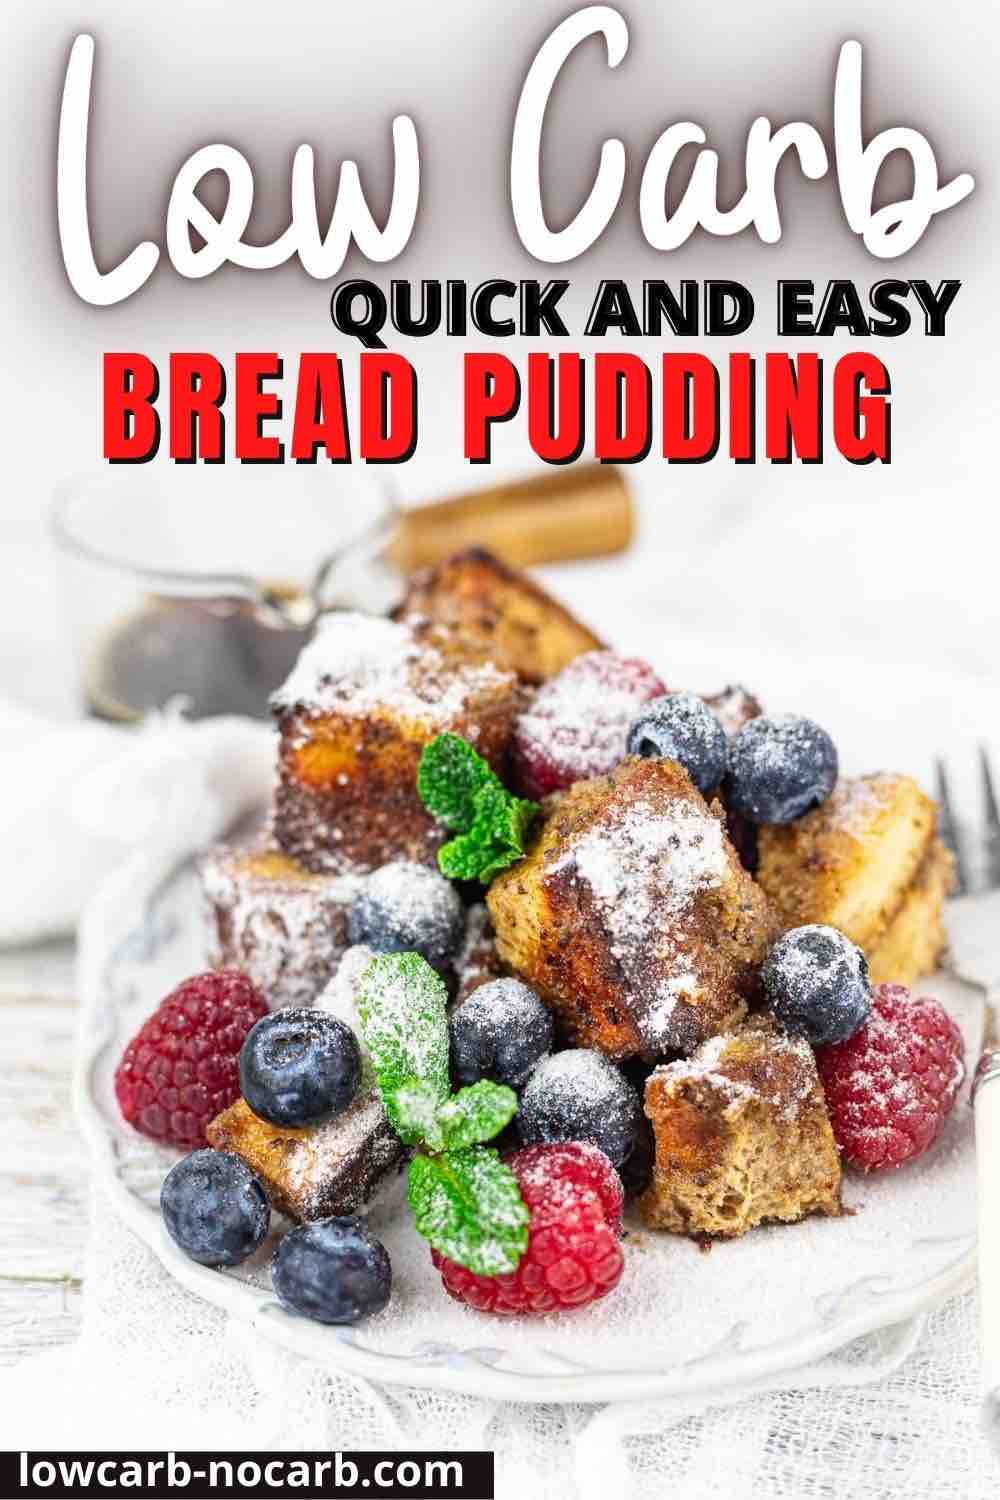 Low Carb Bread Pudding served on a white plate.